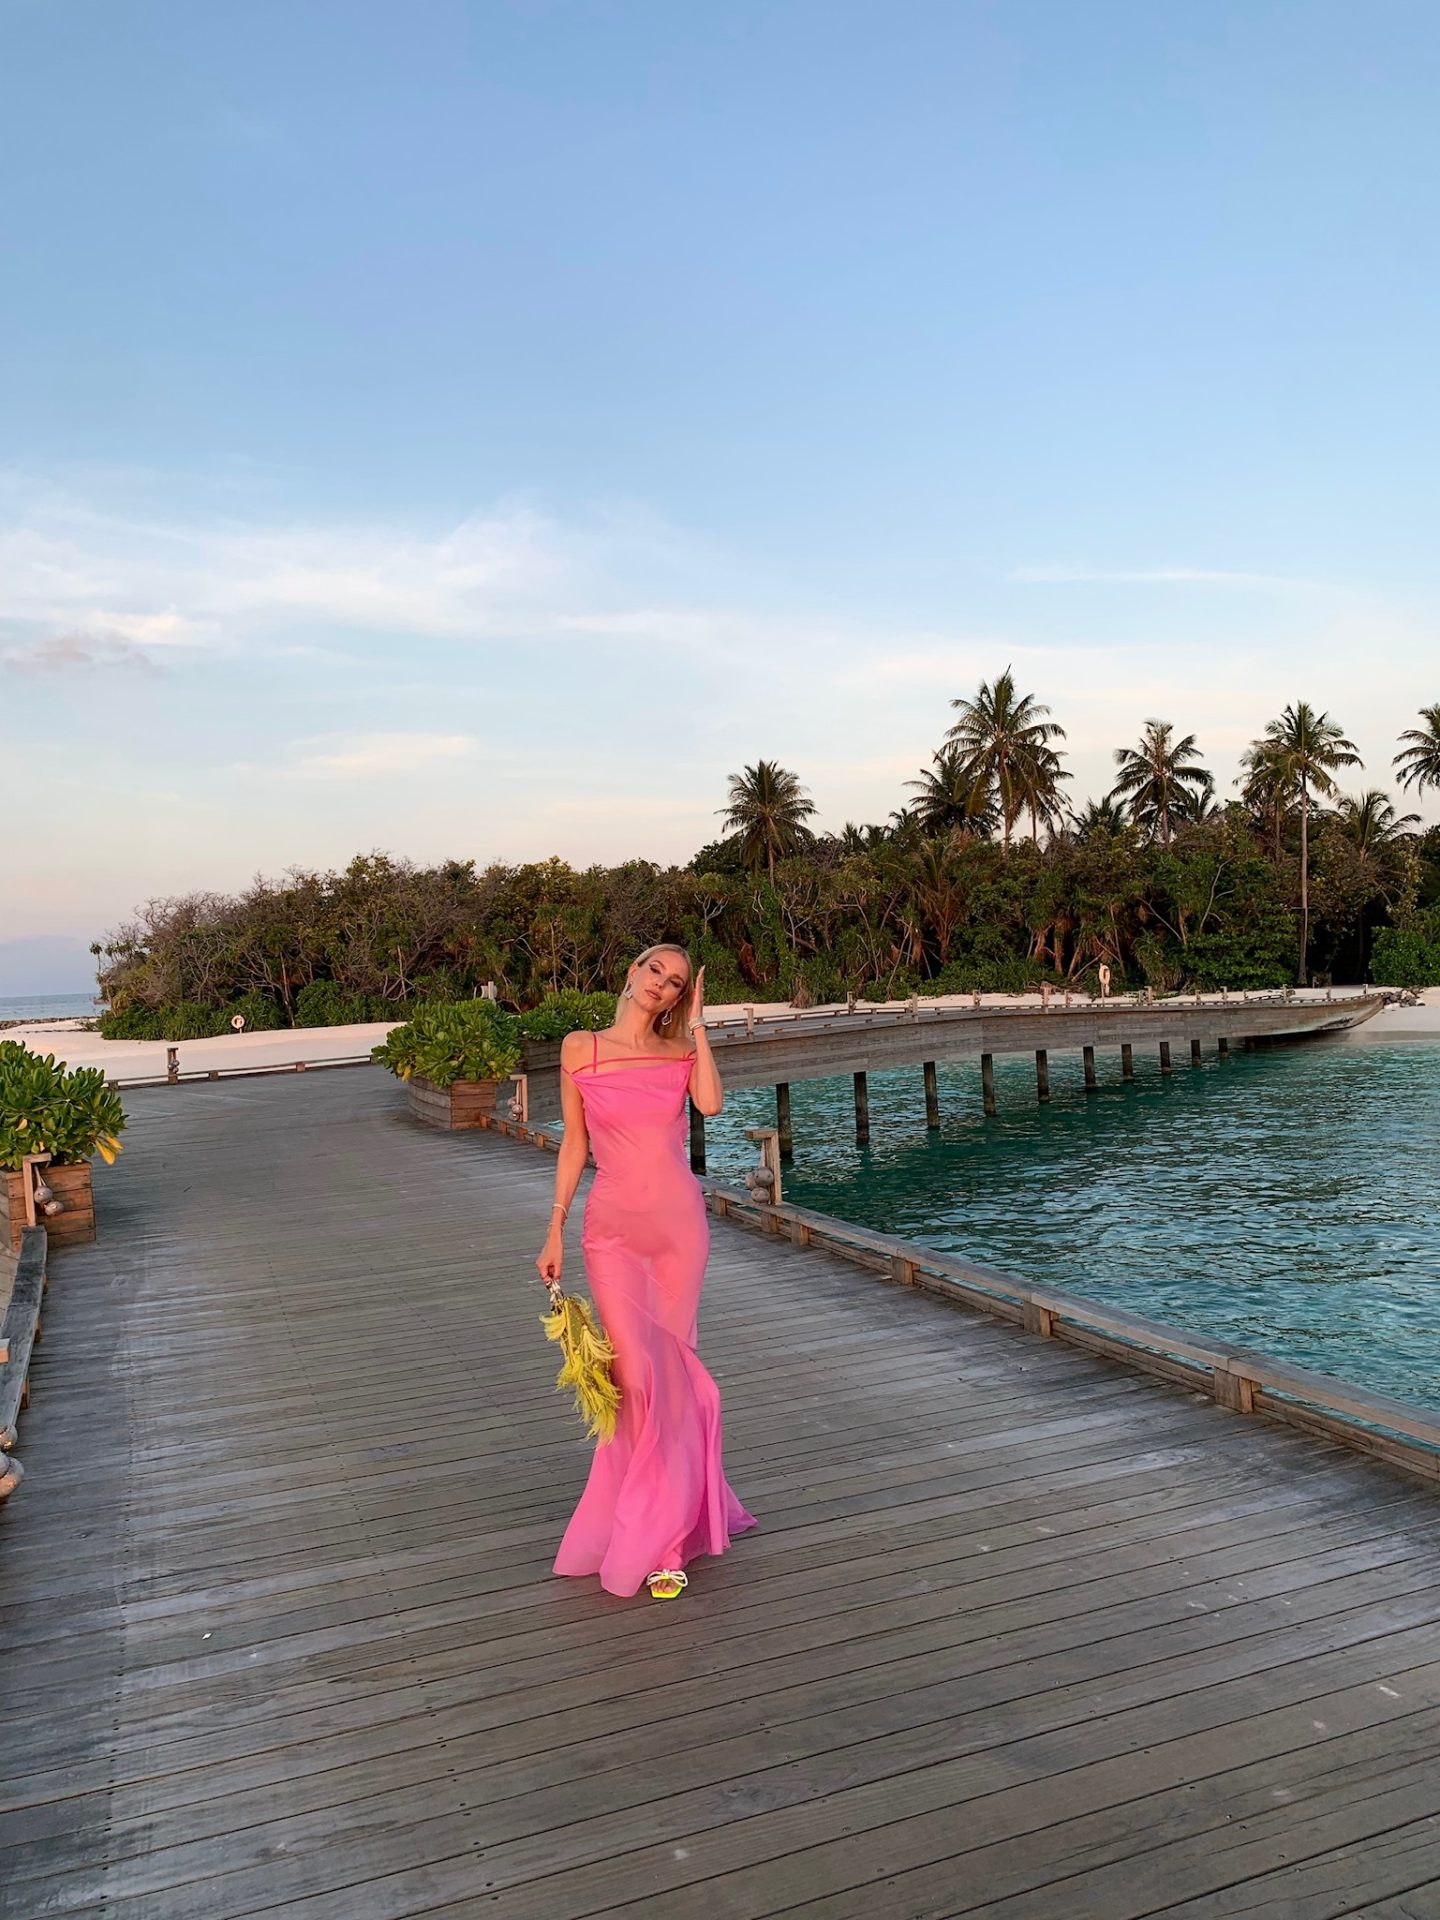 SHOP THE LOOK | PINK MALDIVES VIBES - Leonie Hanne